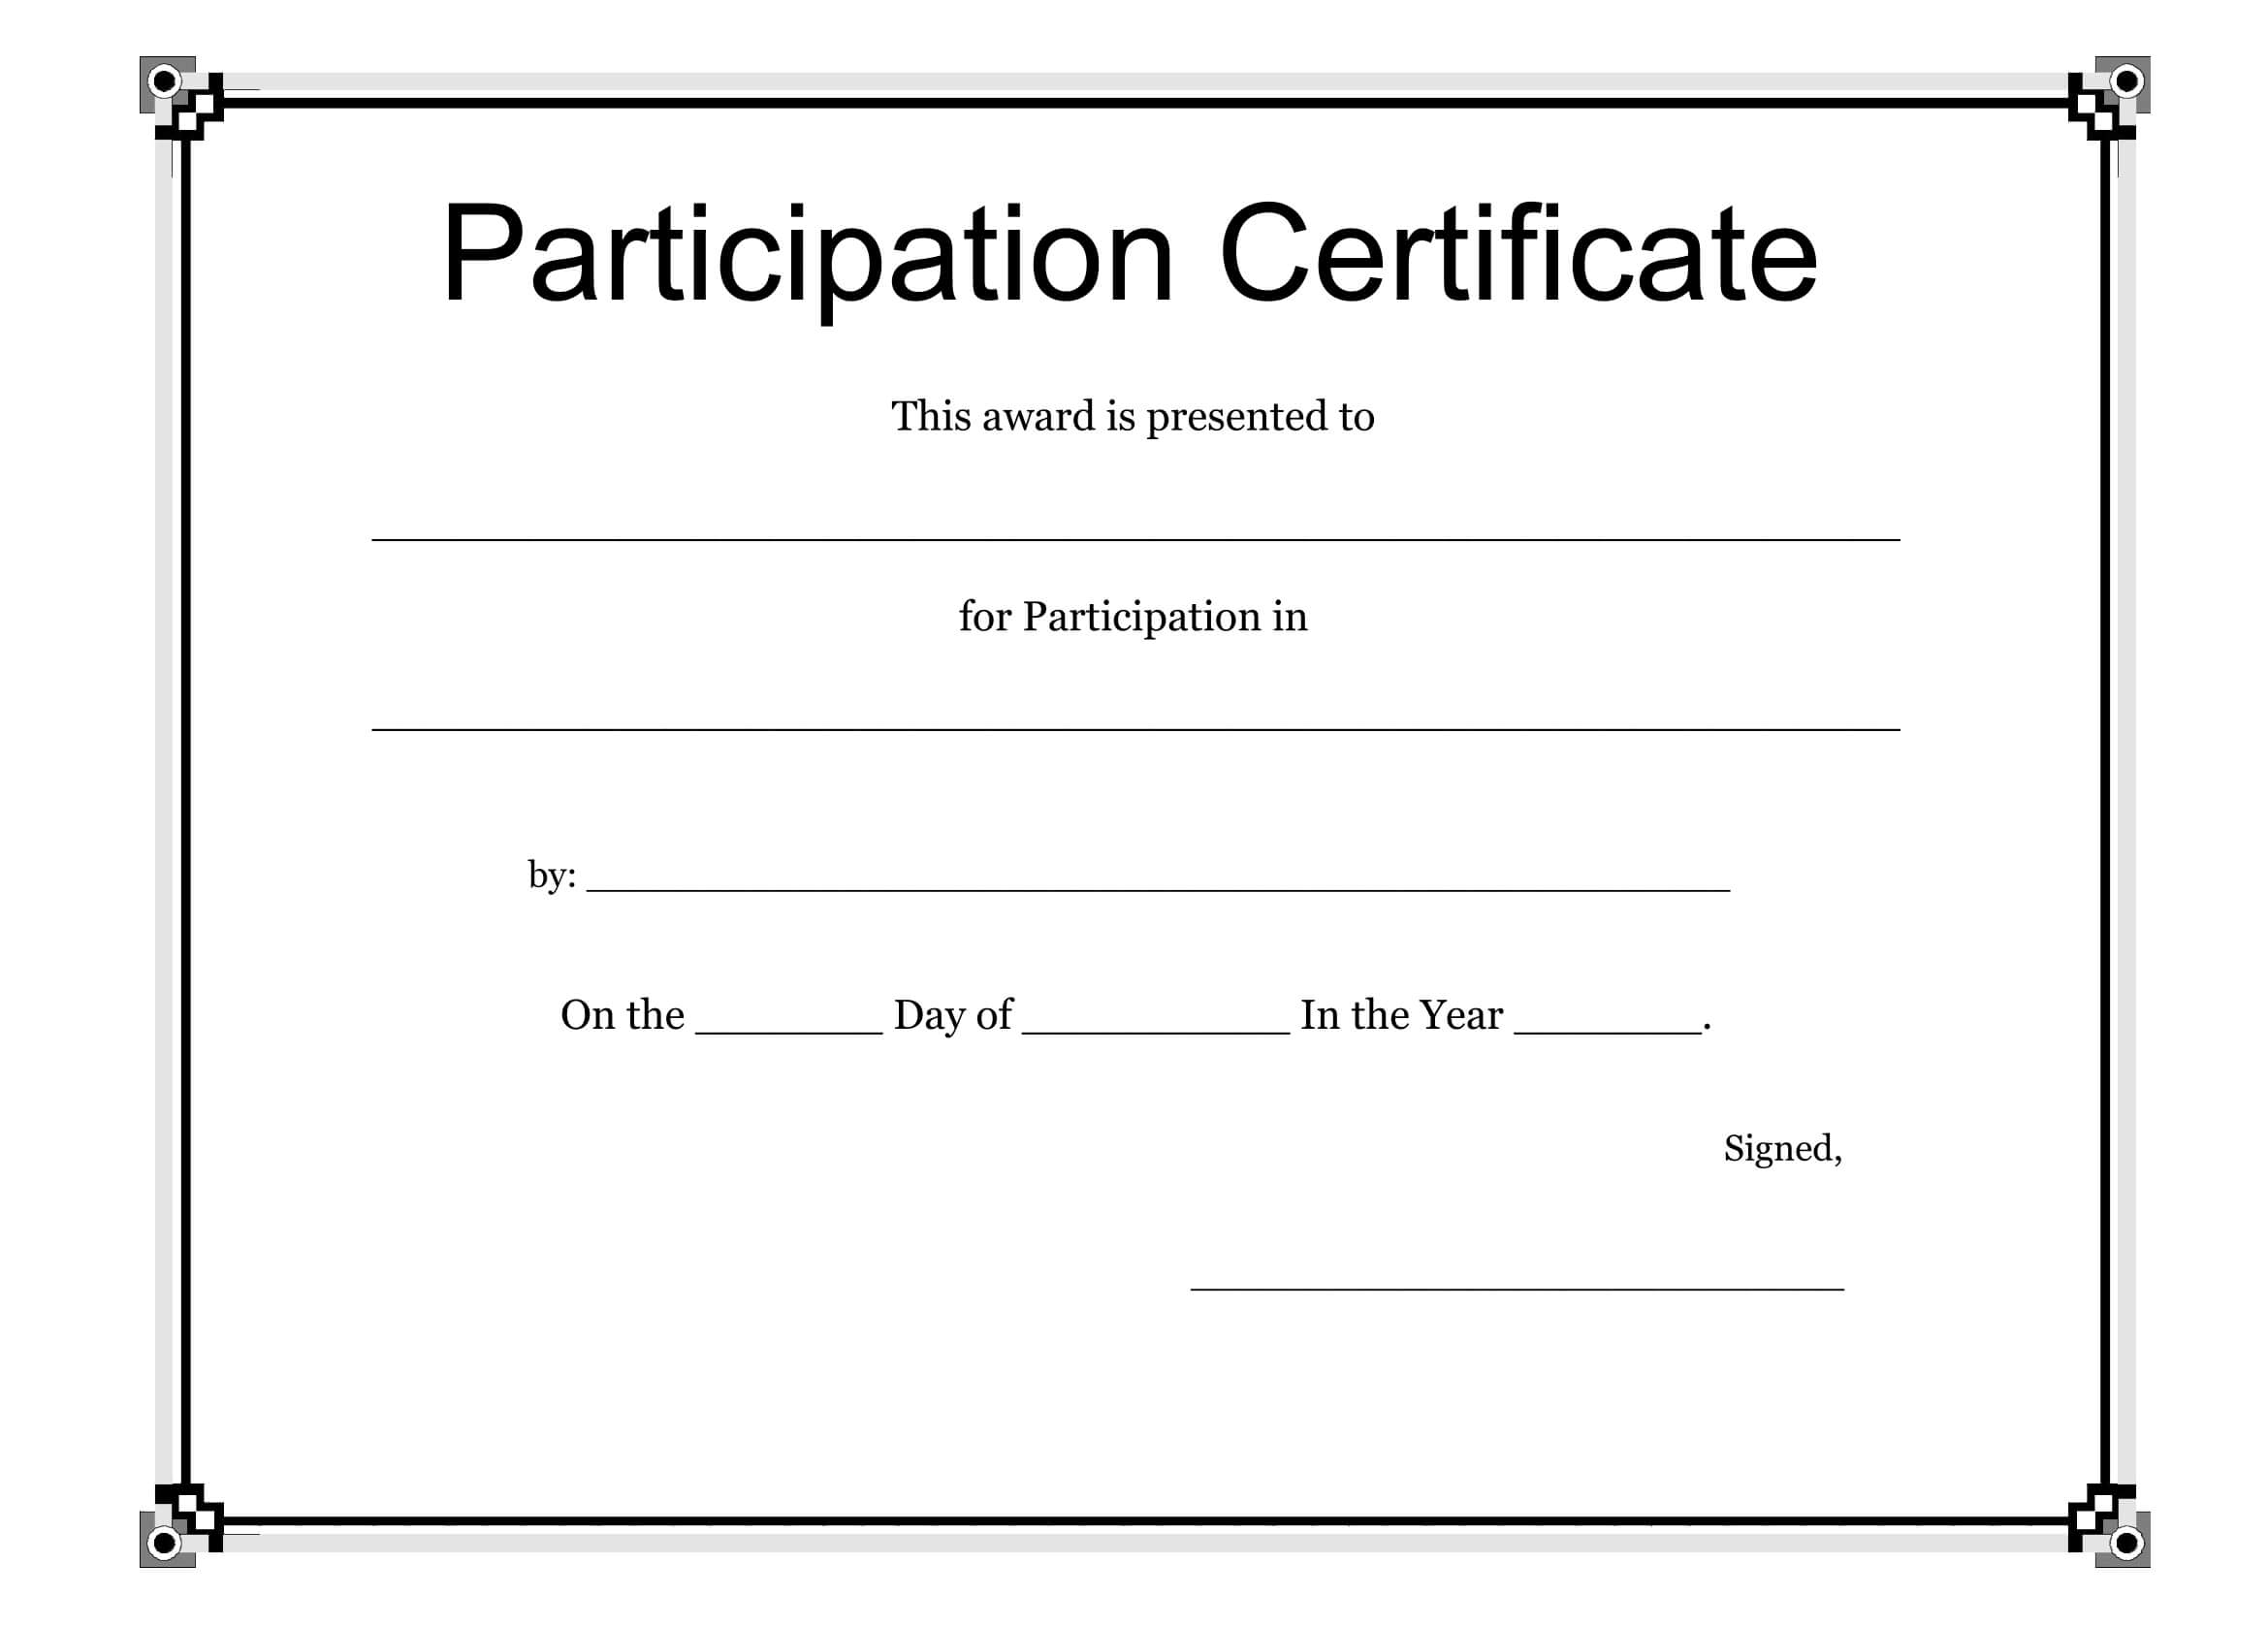 Participation Certificate Template - Free Download Regarding Participation Certificate Templates Free Download